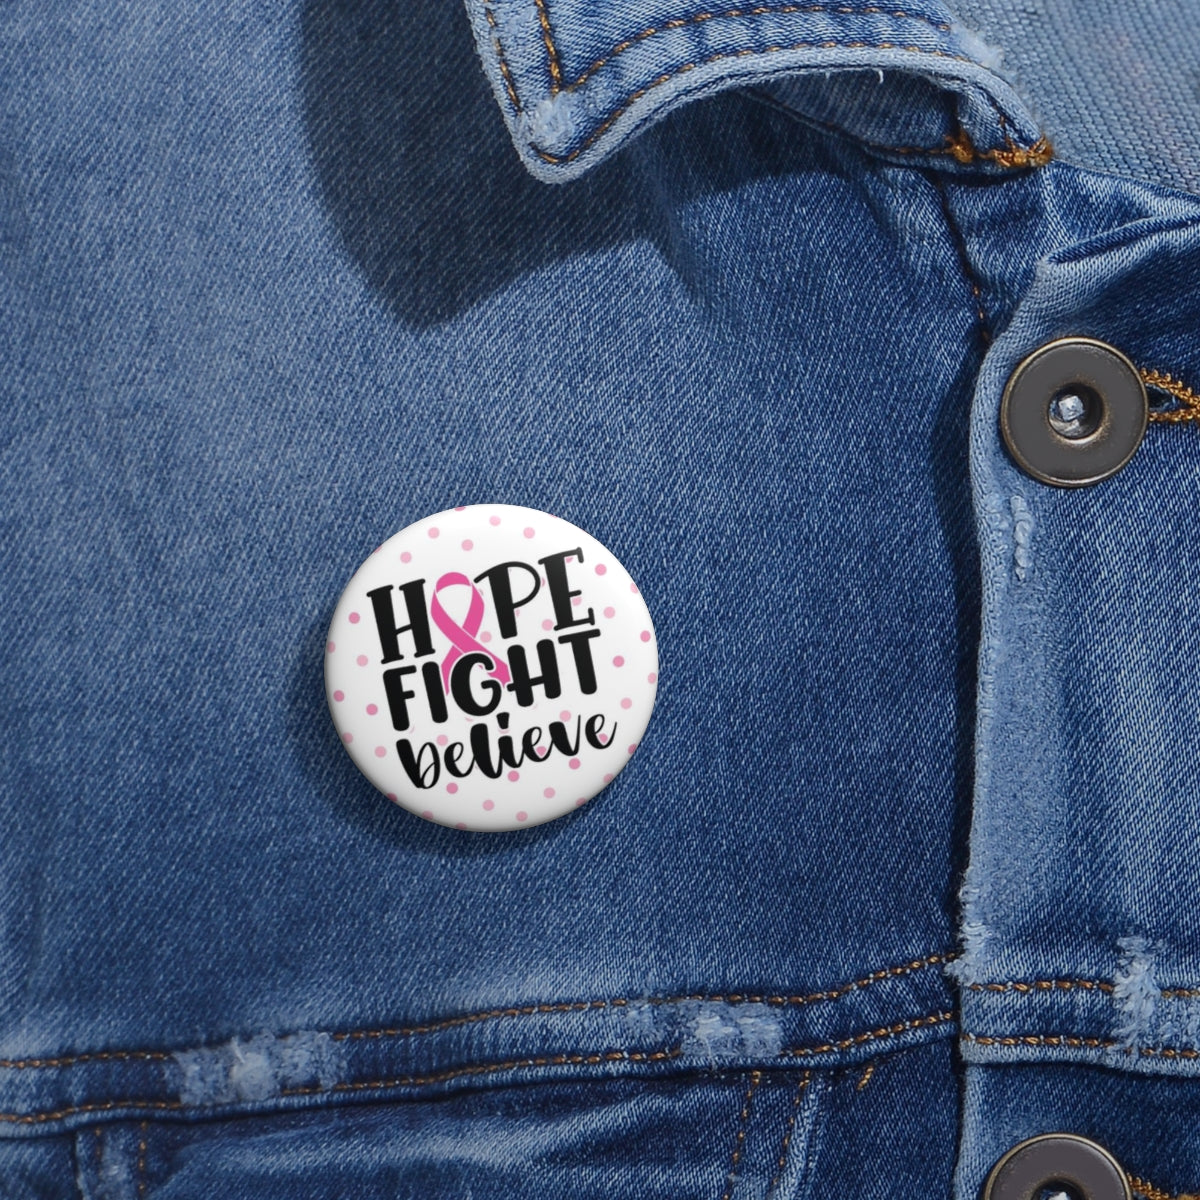 Hope Fight Believe Pin Buttons| Breast Cancer Awareness Pin Button| Cancer Support Button